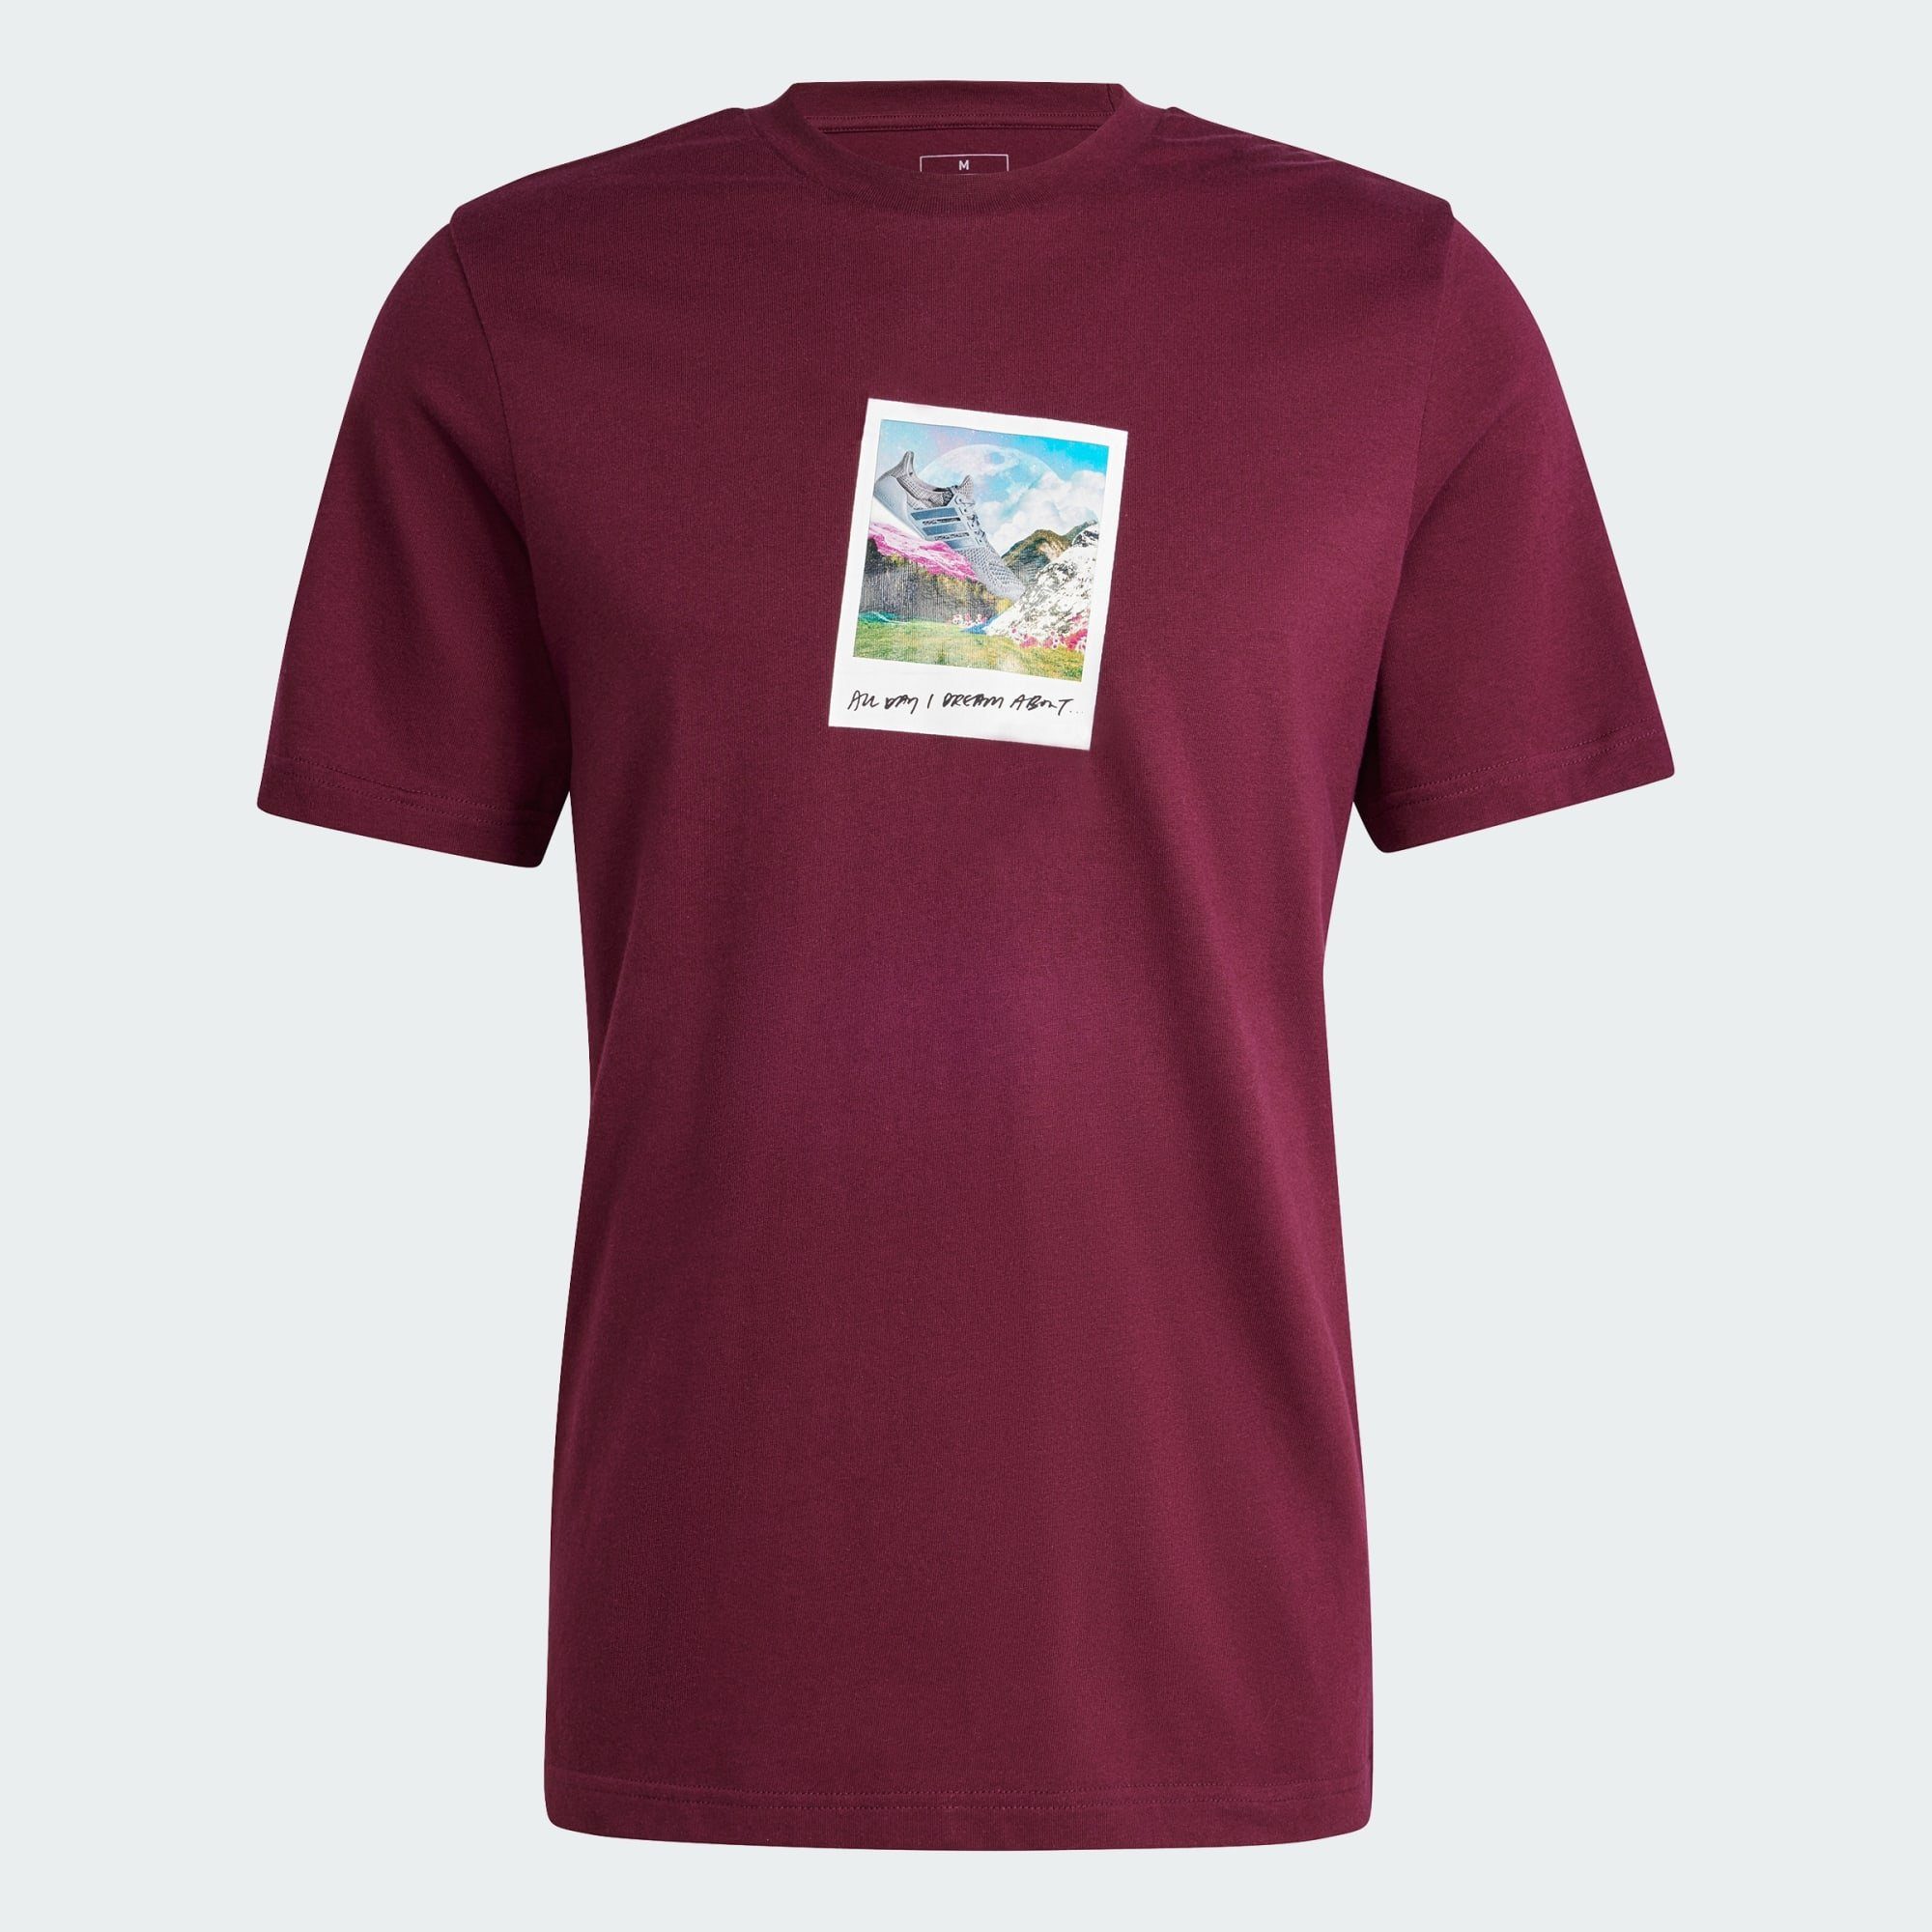 Sportswear T-SHIRT ABOUT... DREAM I T-Shirt Maroon DAY ALL adidas GRAPHIC